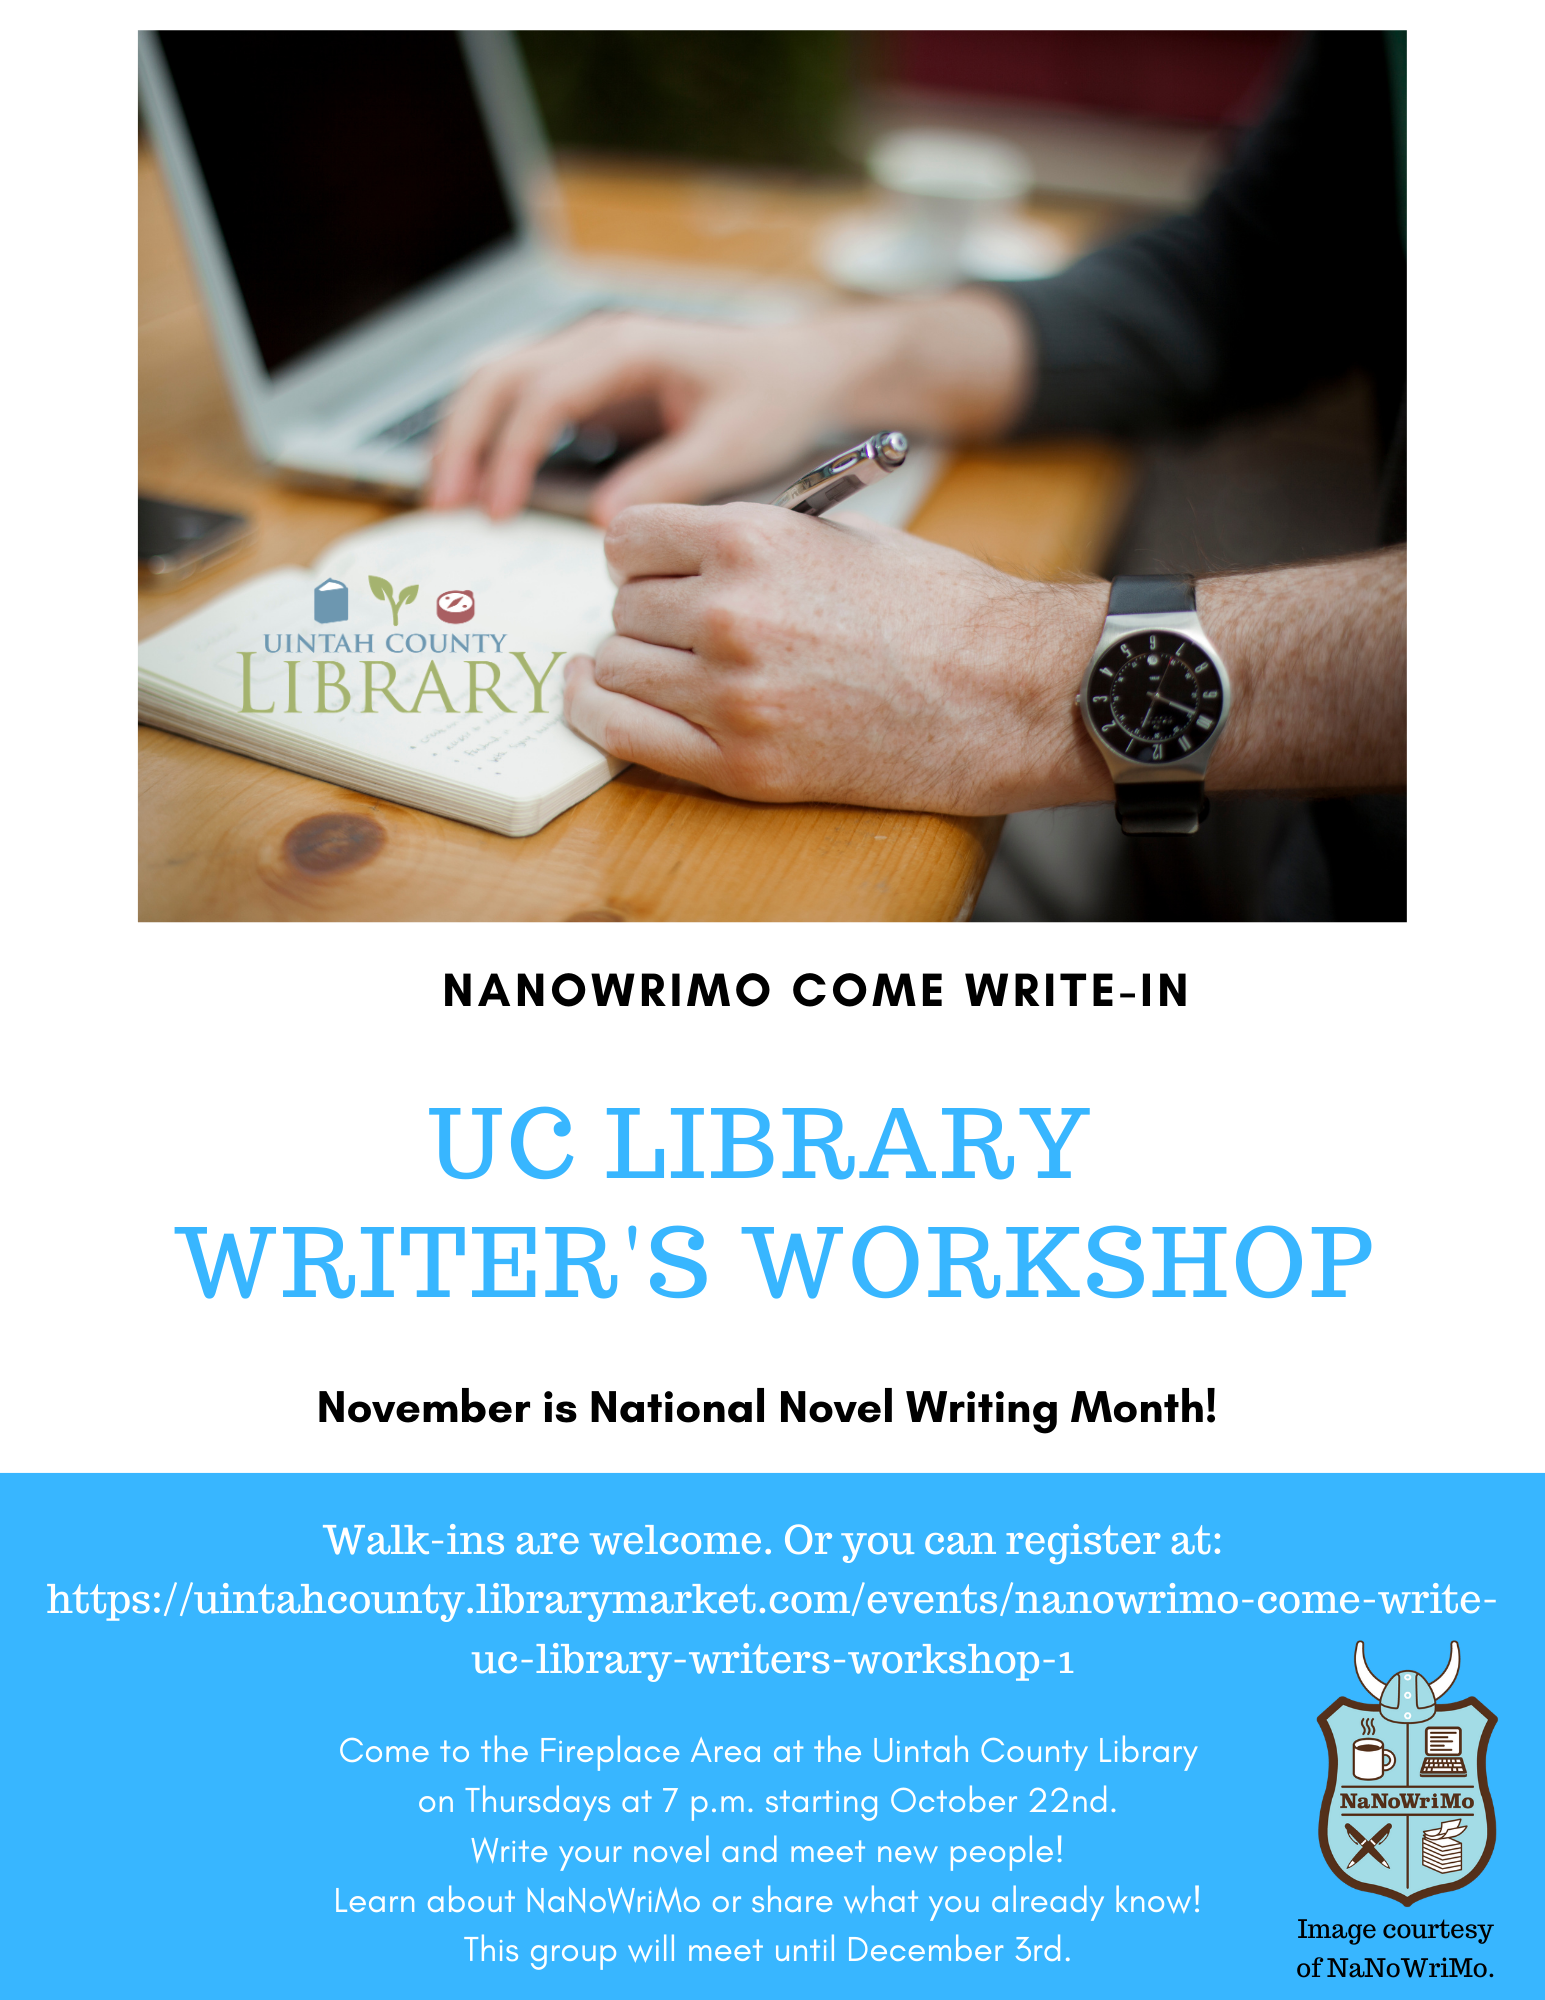 NANOWRIMO COME WRITE- IN November is National Novel Writing Month! UC LIBRARY WRITER'S WORKSHOP! Walk-ins are welcome. Or you can register here.  Come to the Fireplace Area at the Uintah County Library on Thursdays at 7 p.m. starting October 22nd. Write your novel and meet new people! Learn about NaNoWriMo or share what you already know! This group will meet until December 3rd. 